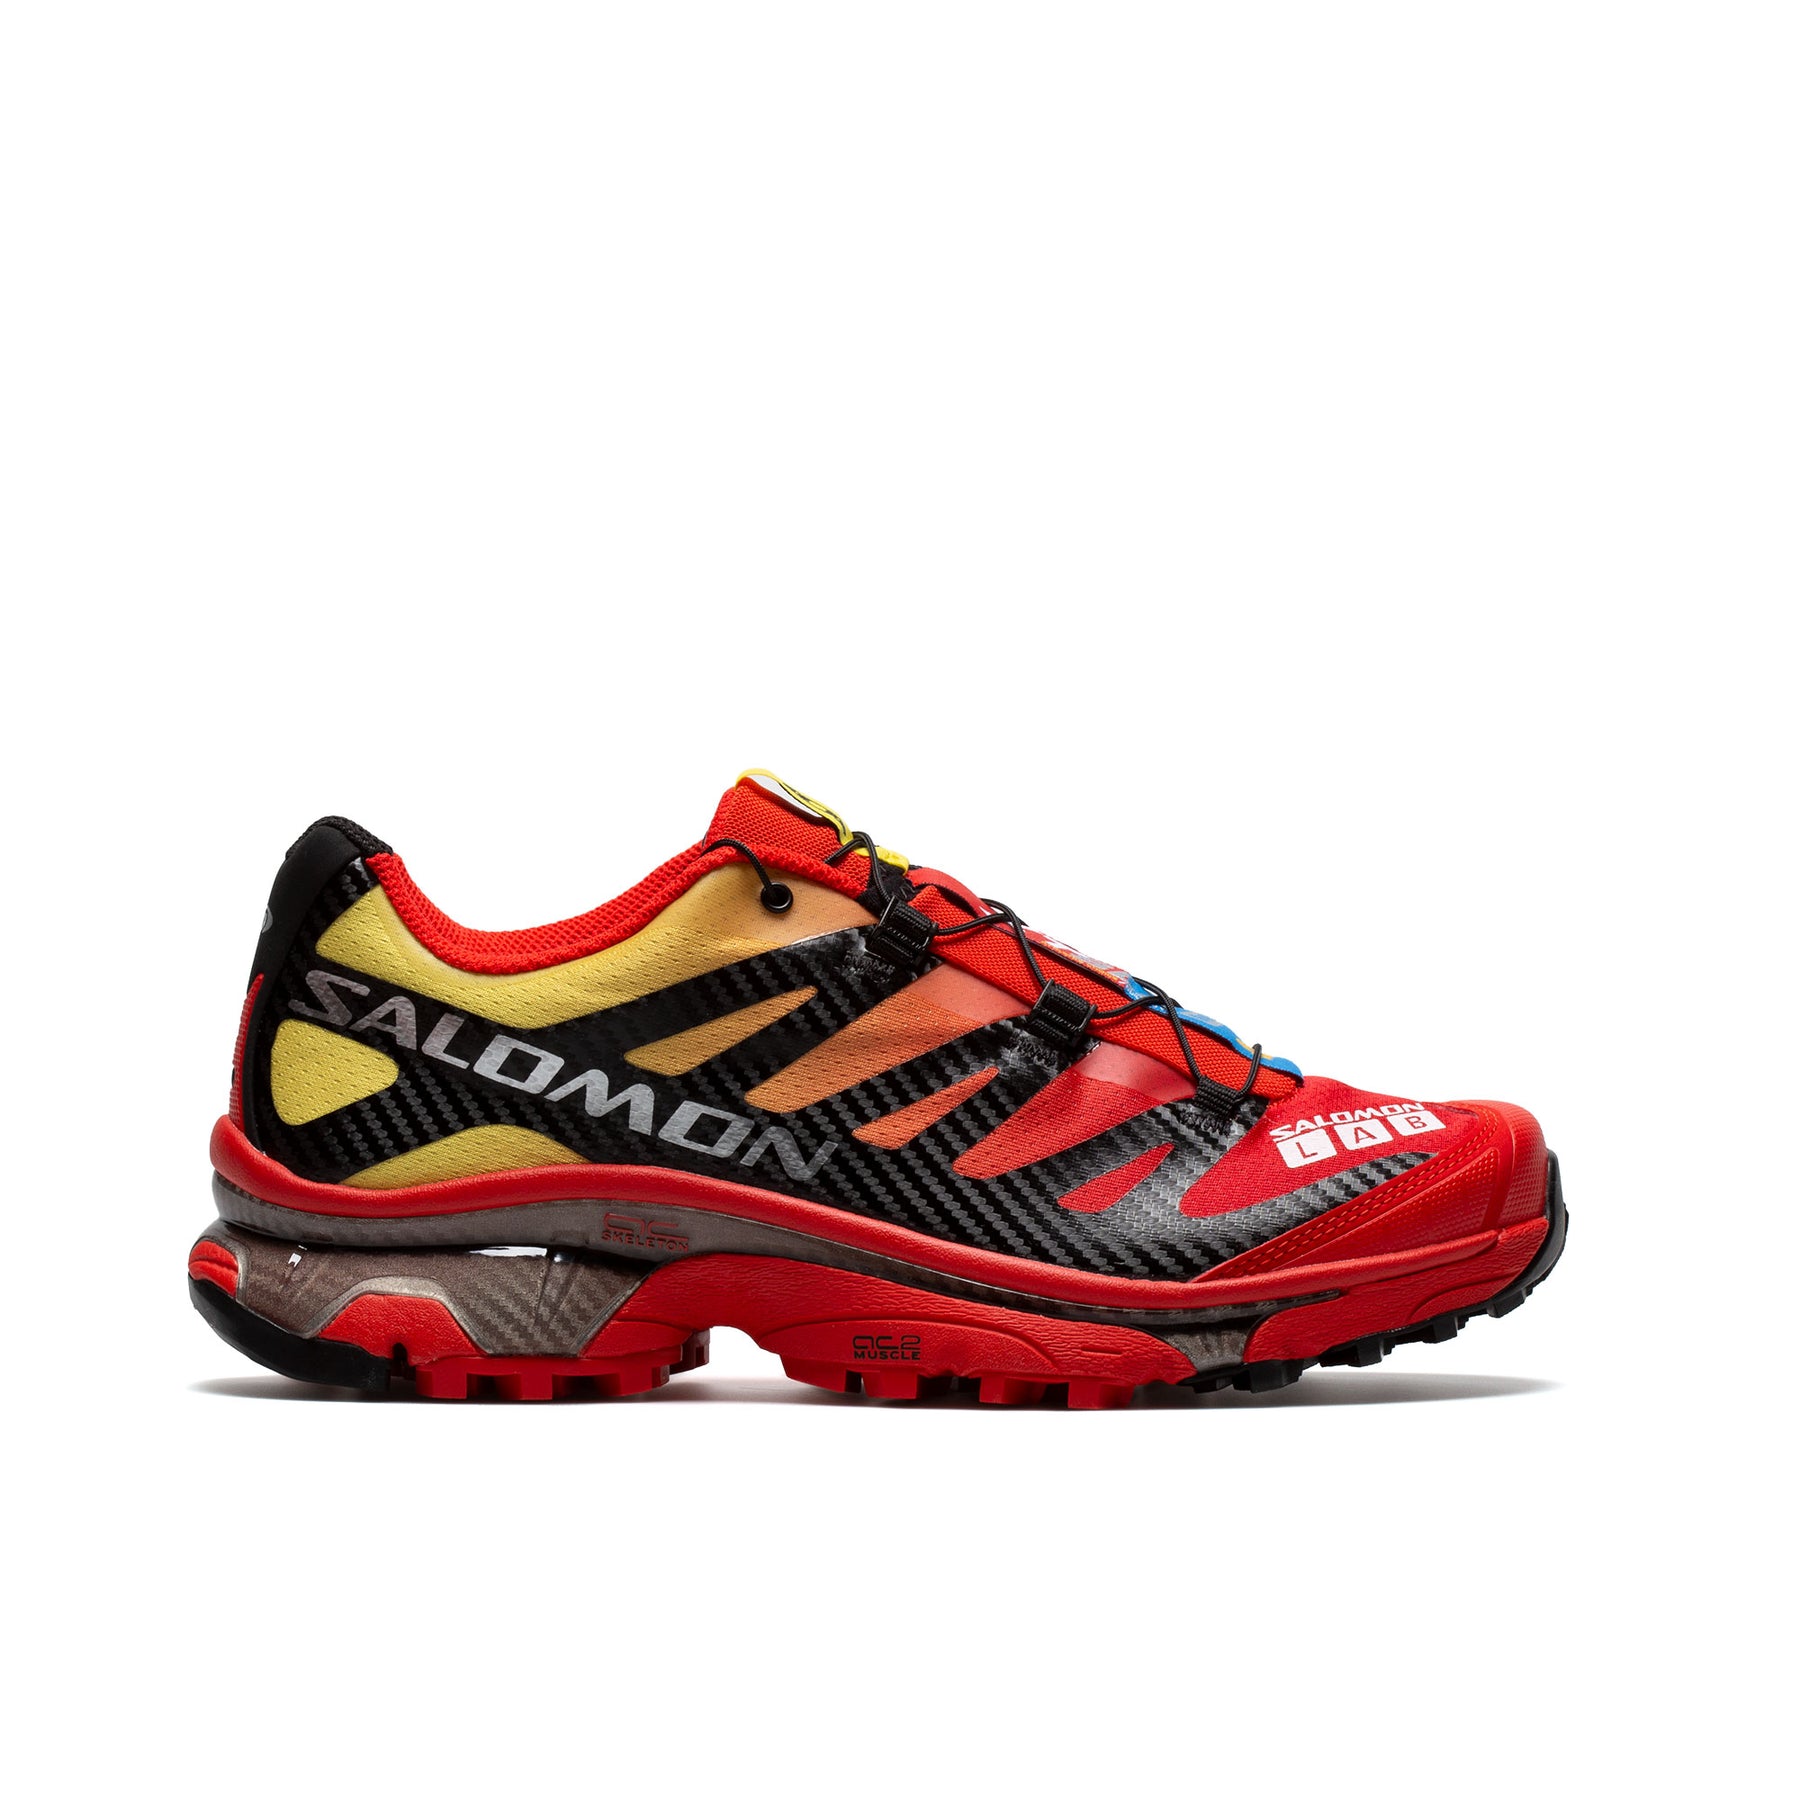 Vrients.com | Salomon Lab Sneakers XT-4 OG Sneakers Red/Black/Empire Yellow)